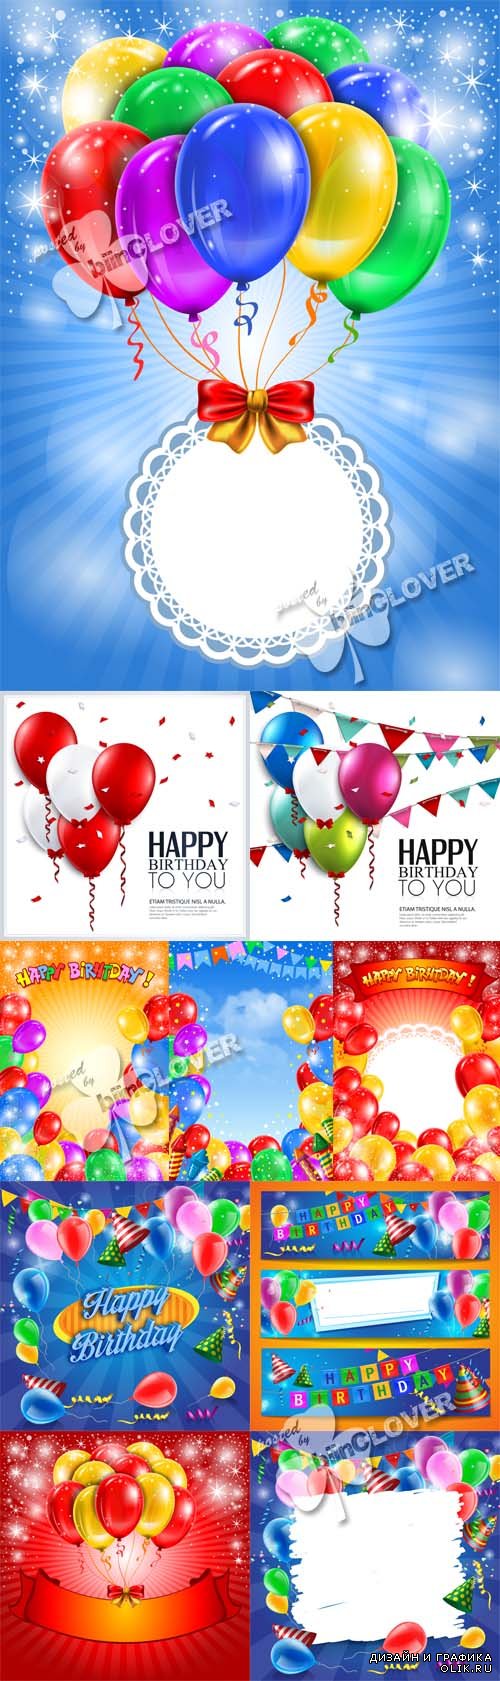 Holiday or Happy birthday cards with colorful balloons 0598